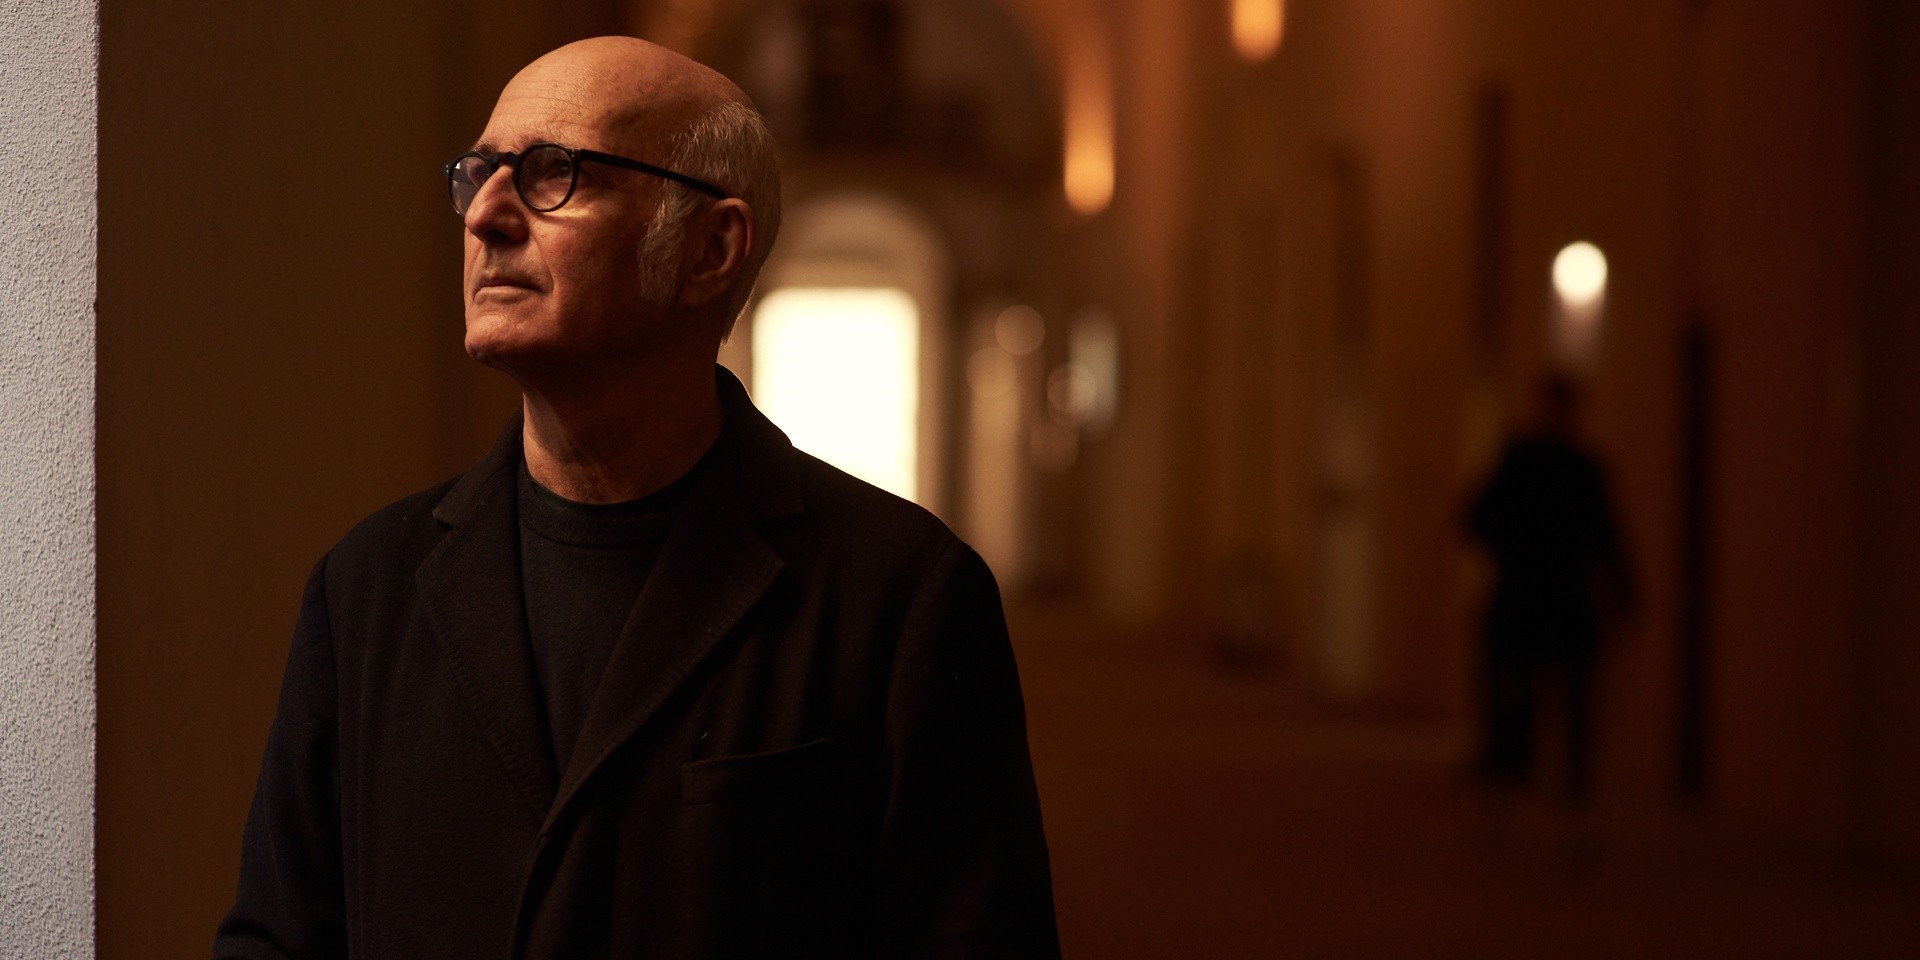 Ludovico Einaudi is coming to Singapore in January 2020